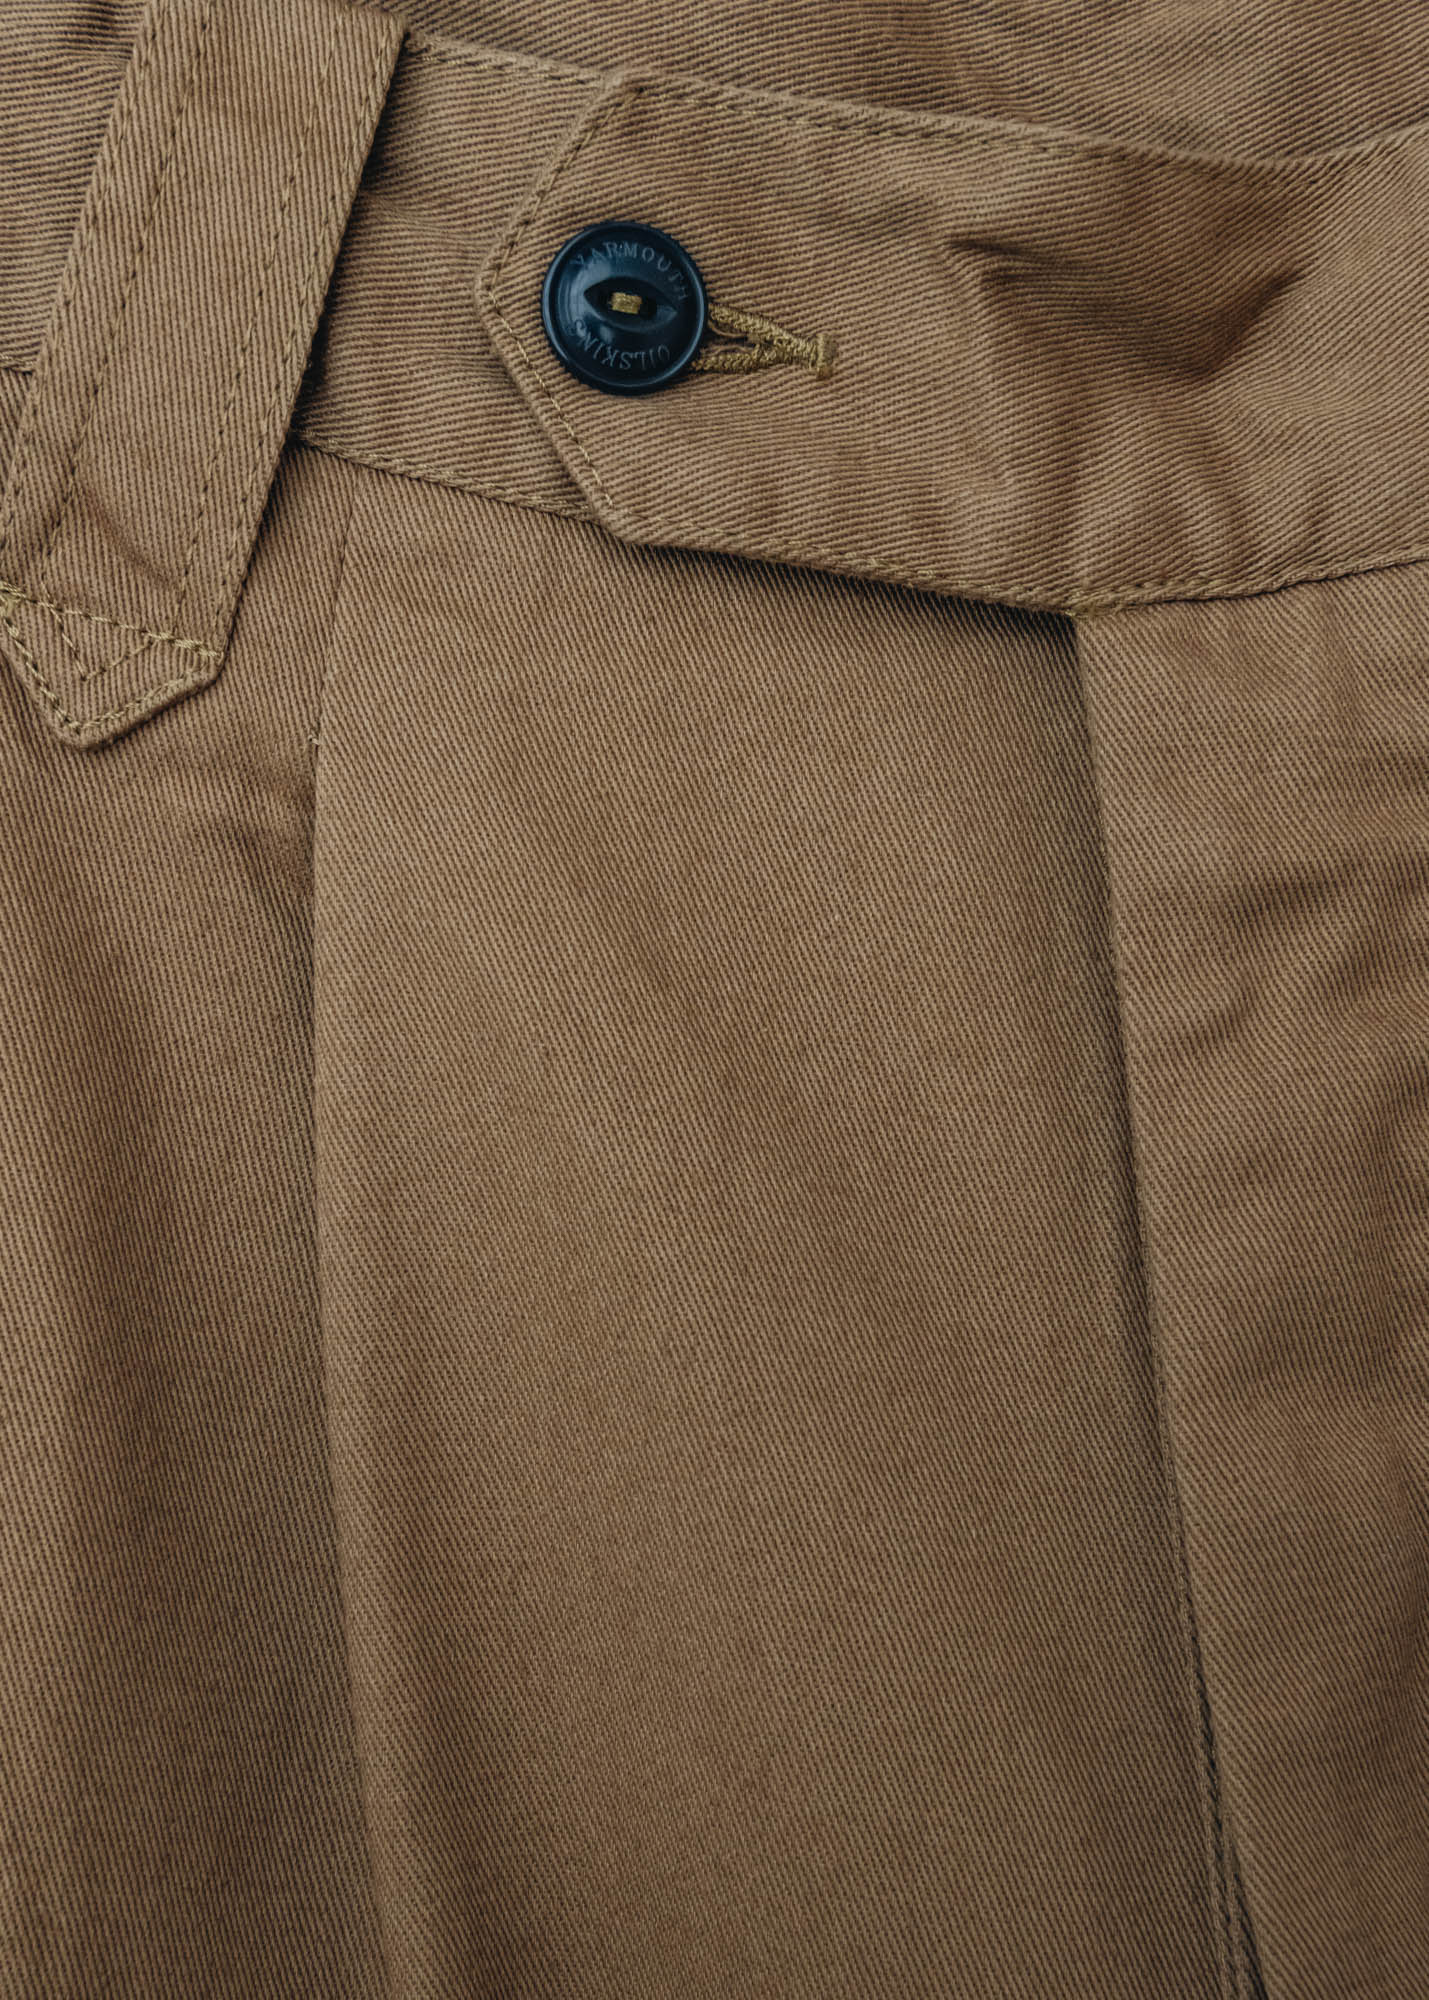 Yarmouth Oilskins Work Trousers in Khaki